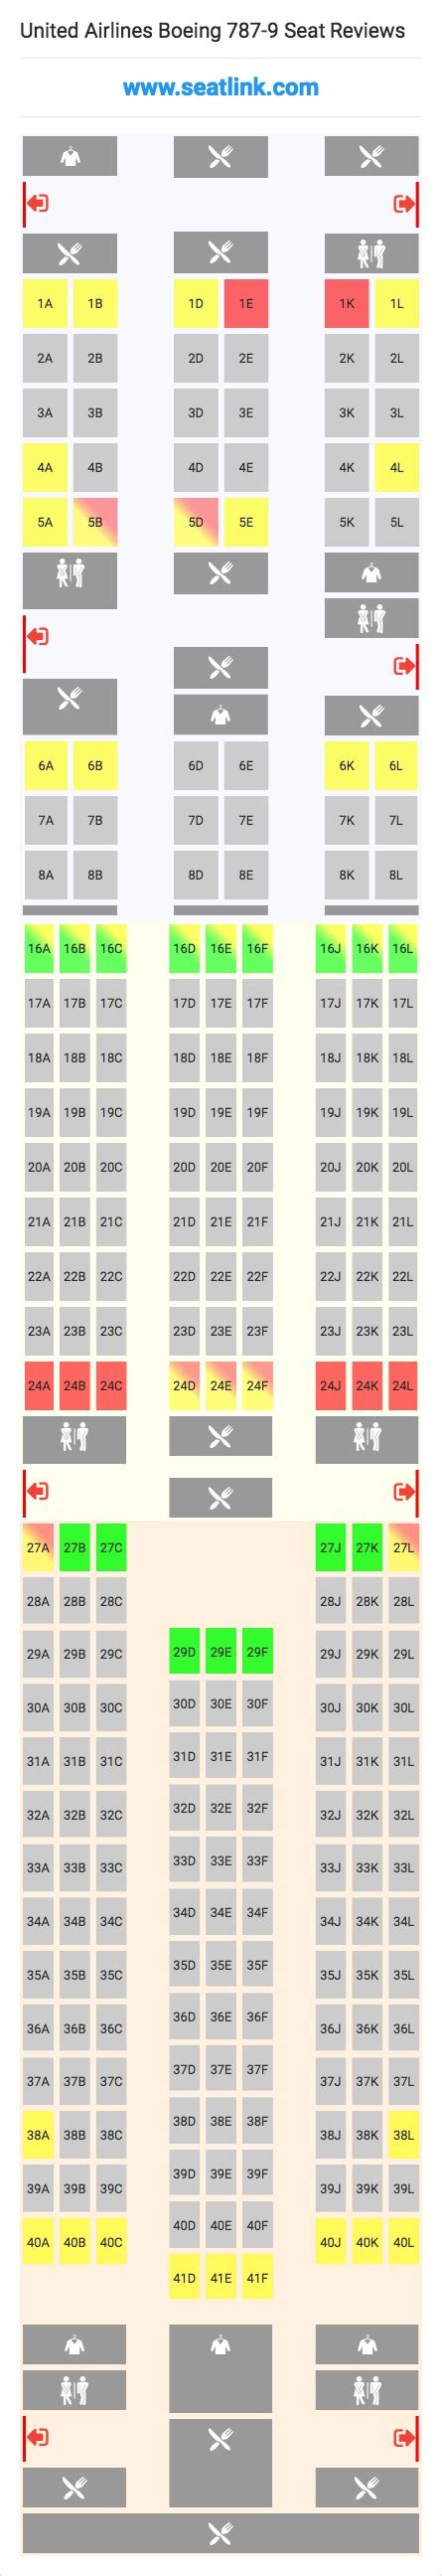 Boeing Seat Map Virgin Atlantic Awesome Home